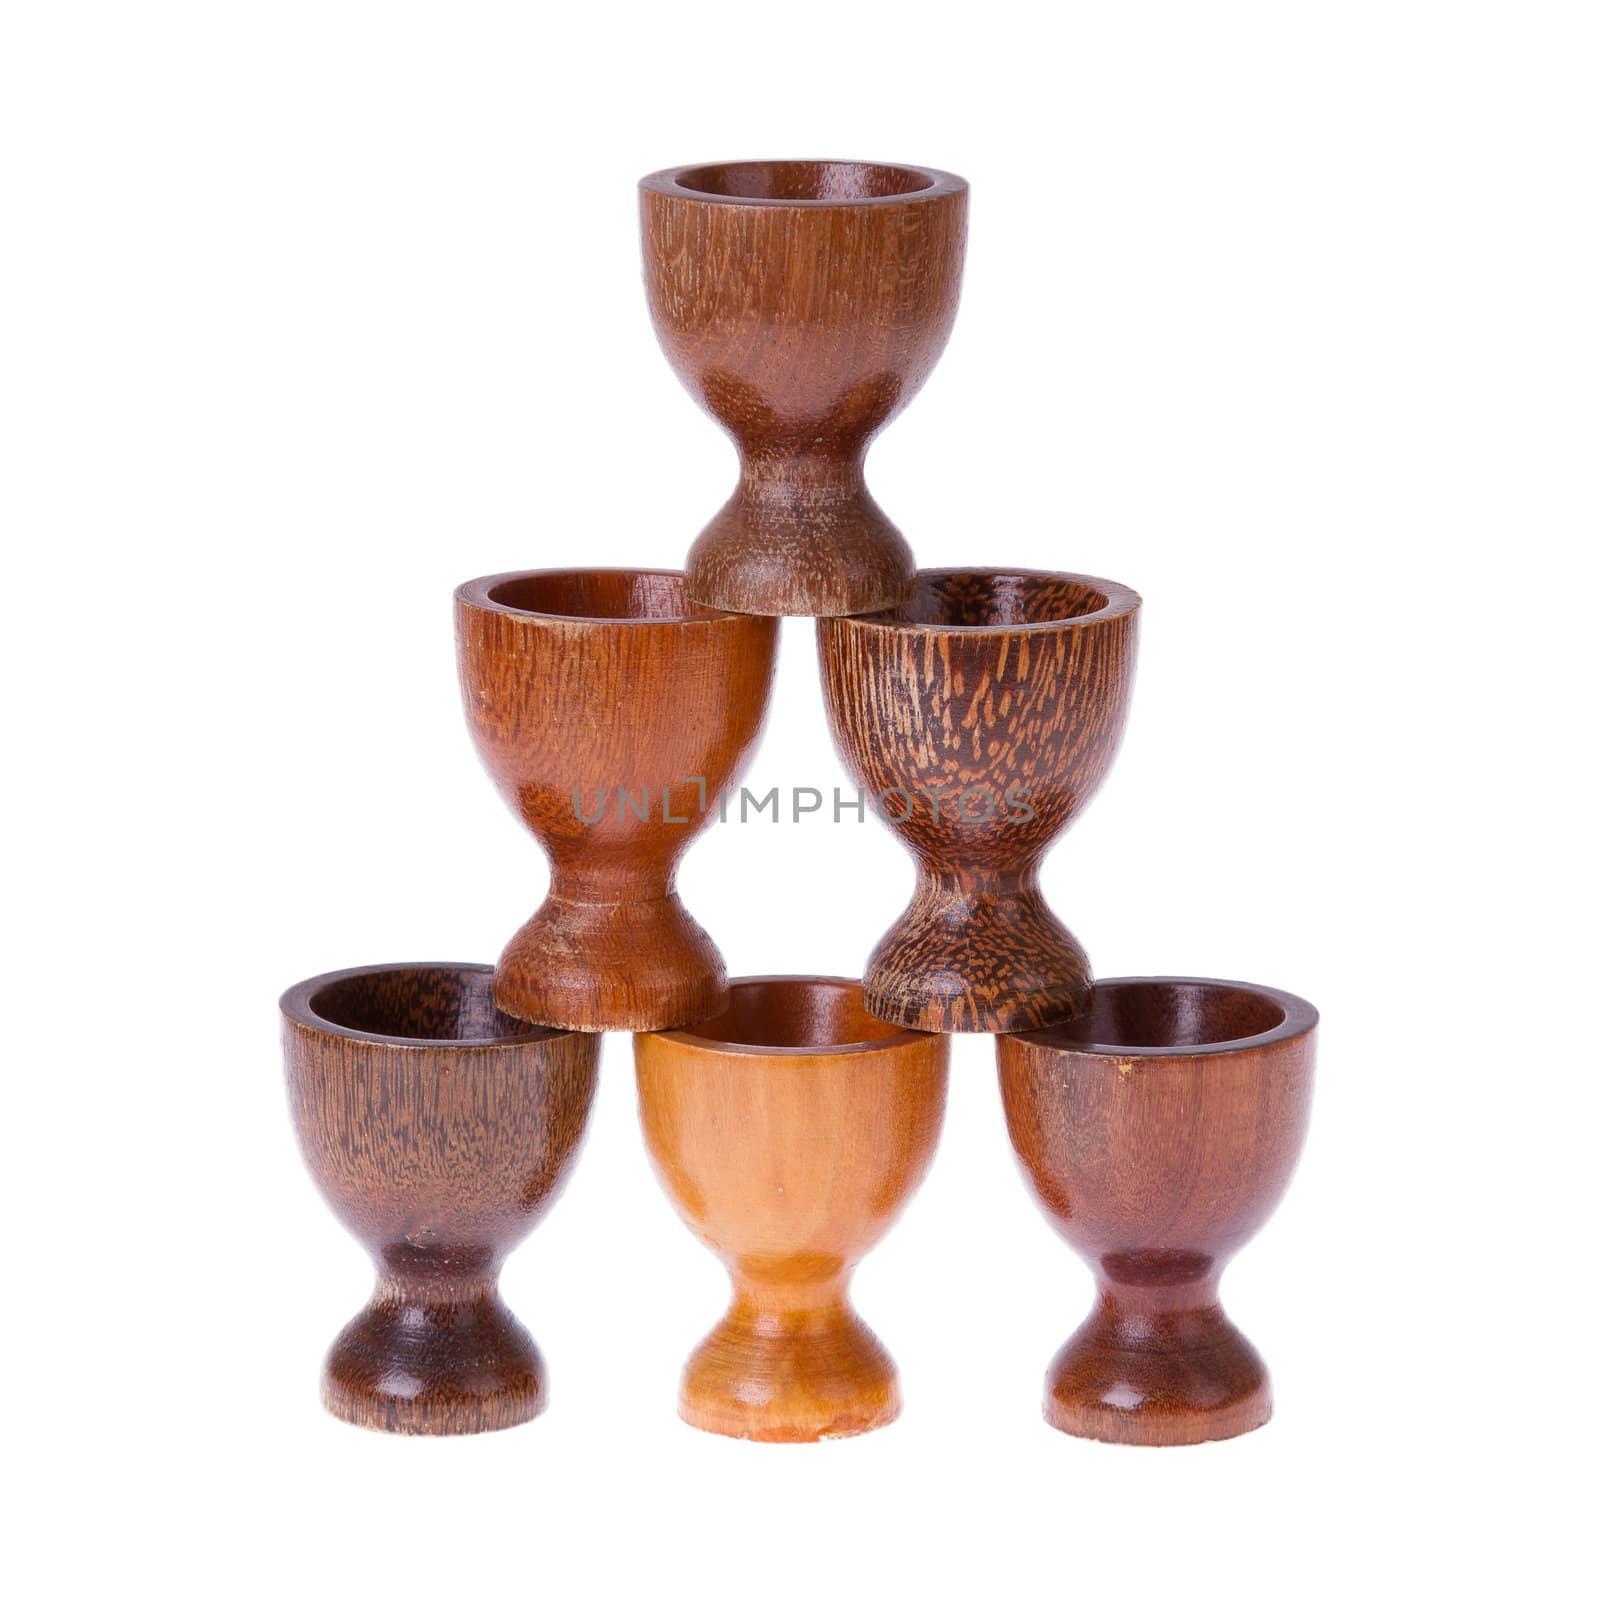 Set of different wooden egg cups isolated on white